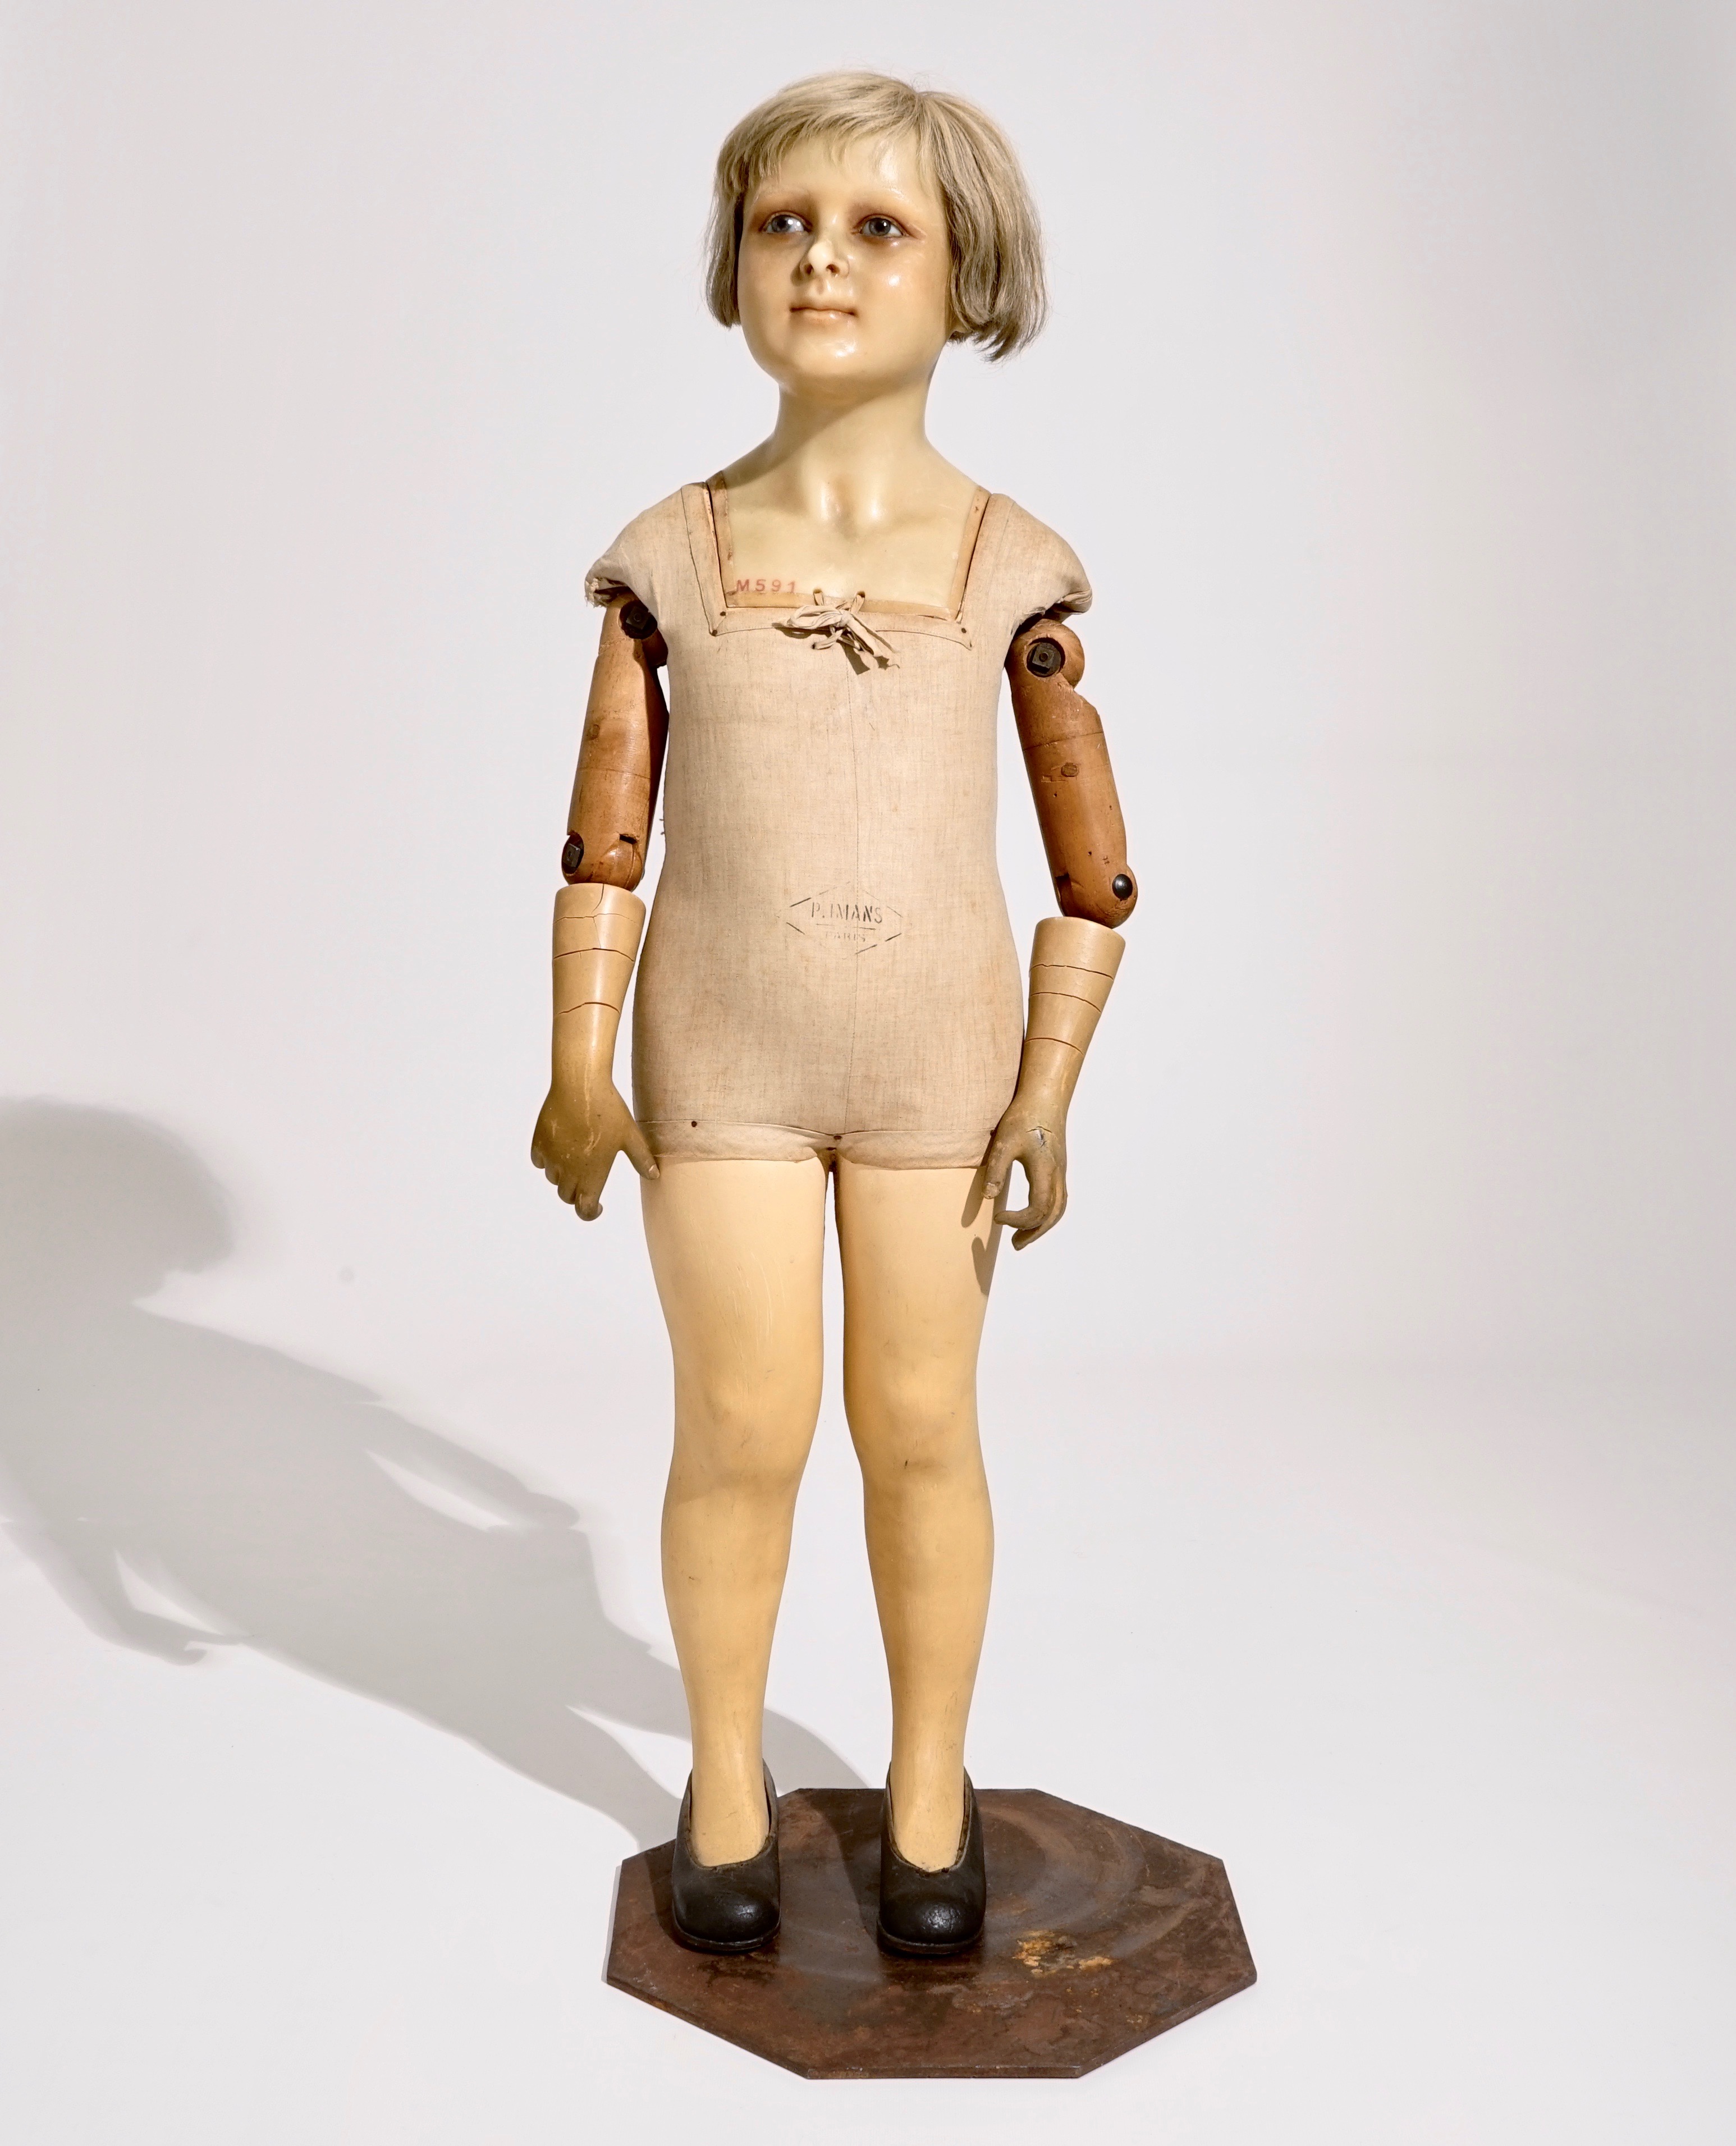 A French Wax Head Mannequin Doll Of A Girl Pierre Imans Paris Ca 1920 Rob Michiels Auctions